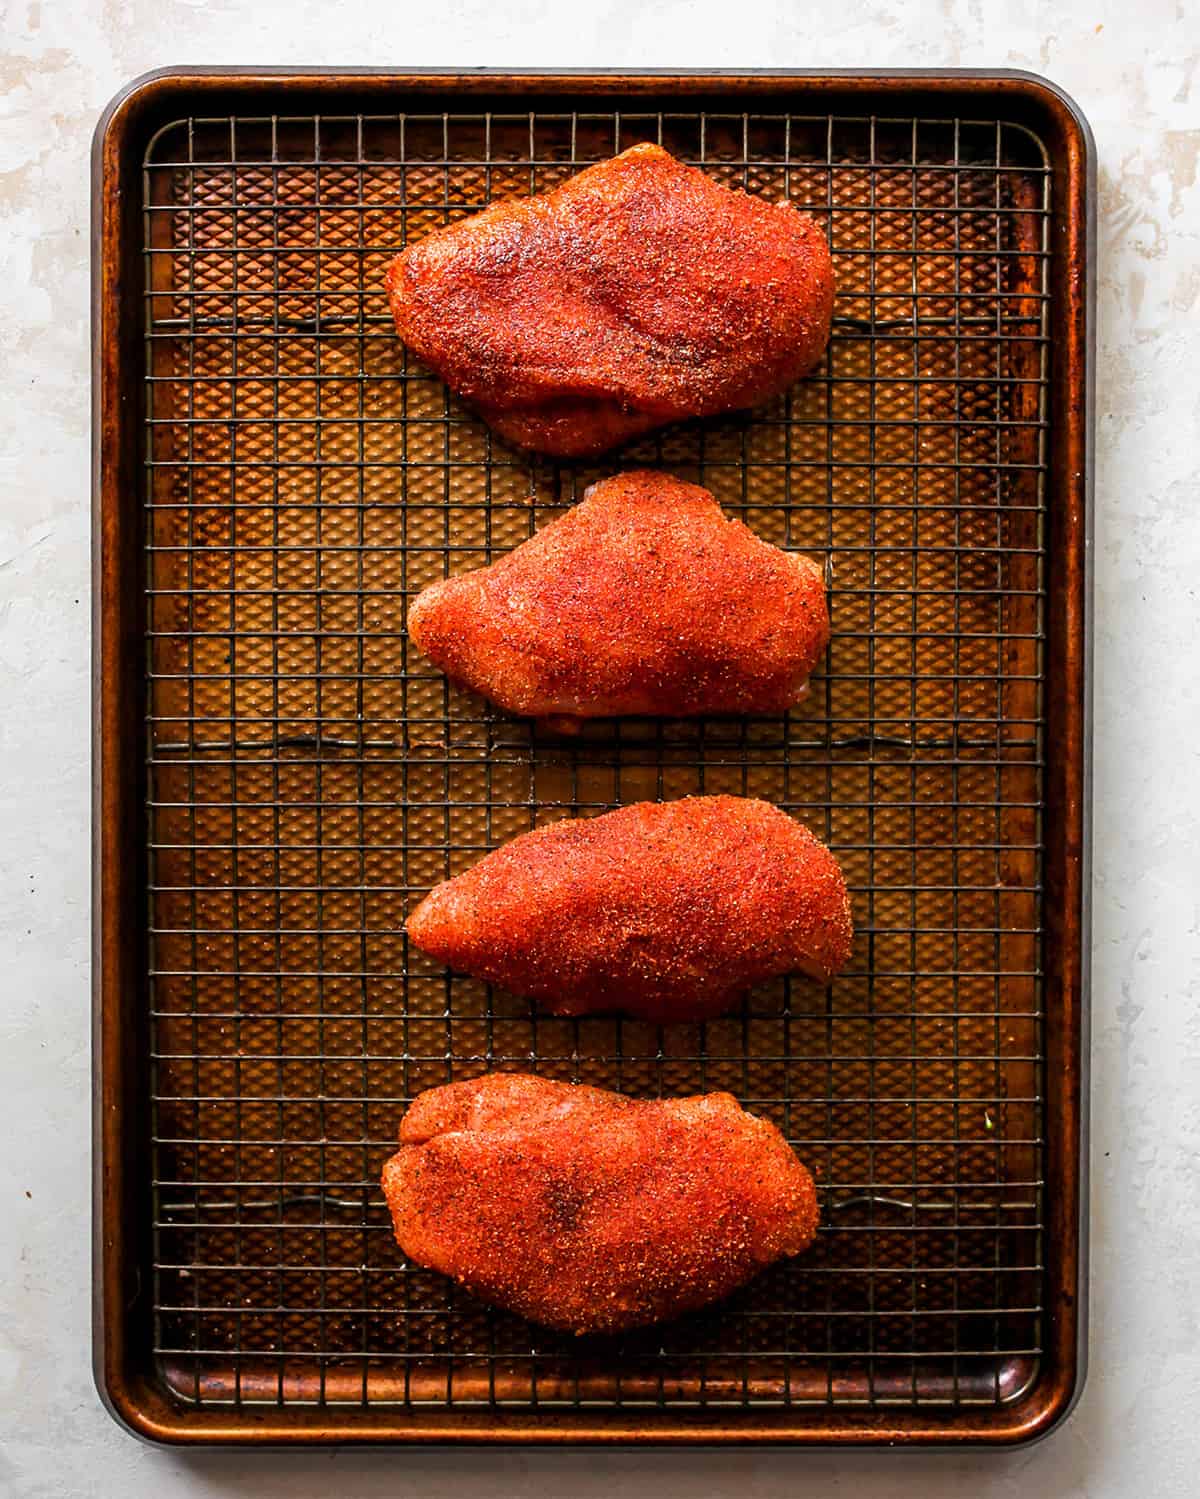 overhead photo showing how to cook chicken breasts in the oven - breasts coated with spice mixture on a wire rack on a baking sheet